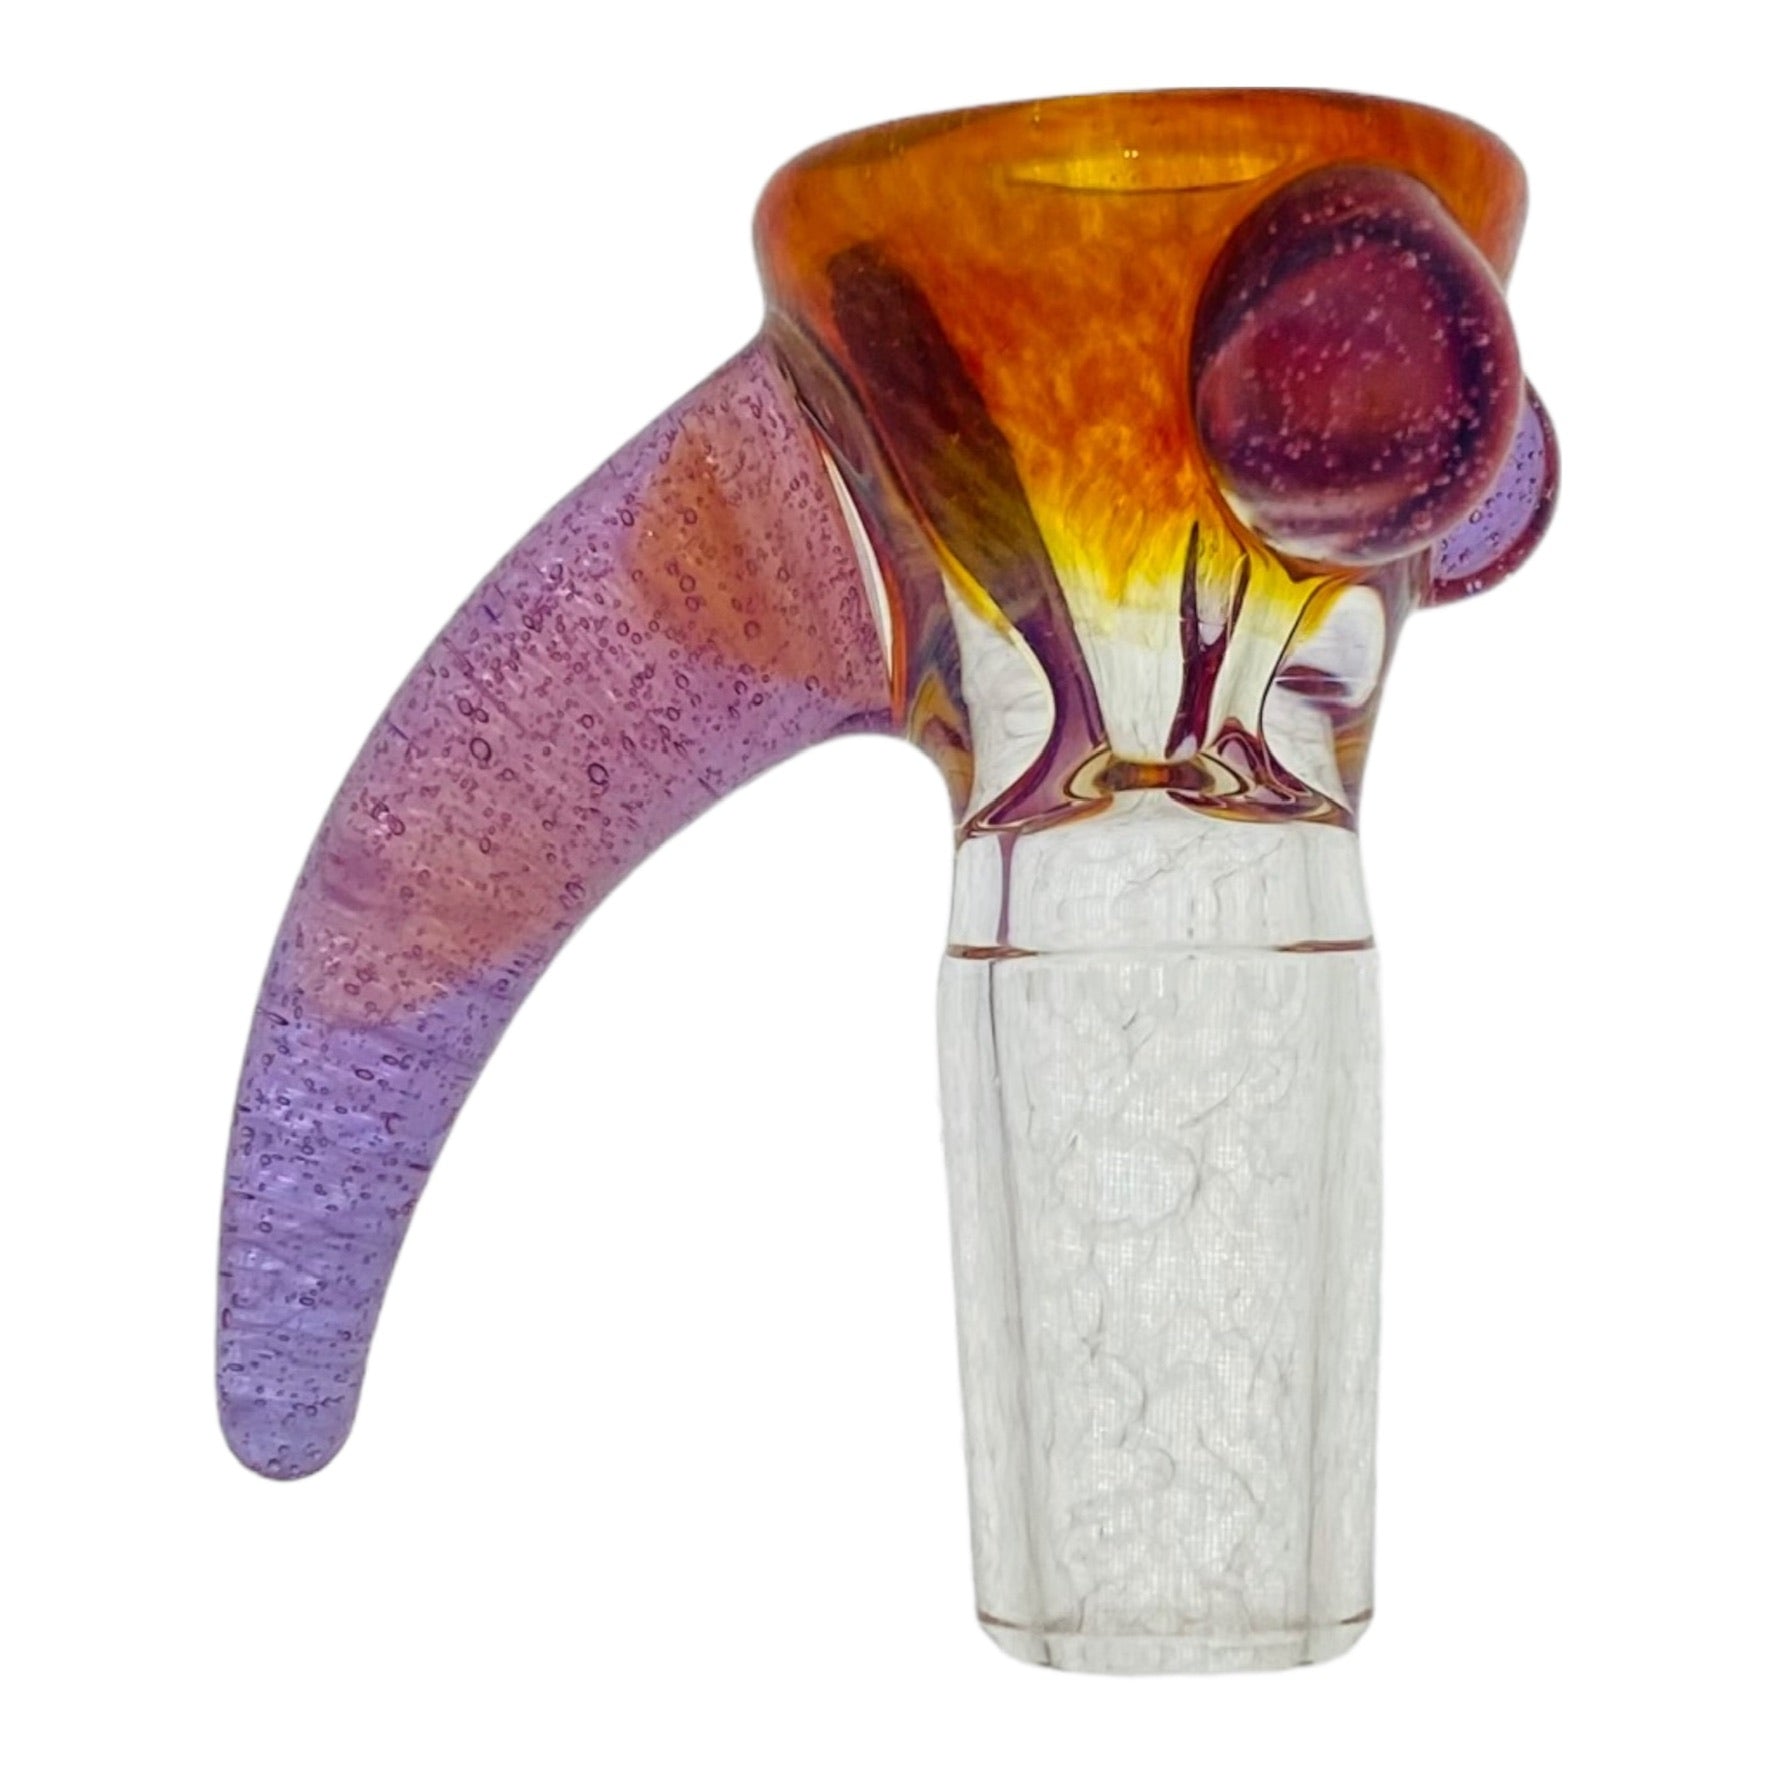 Arko Glass - 14mm Bowl Amber Frit With Purple Handle